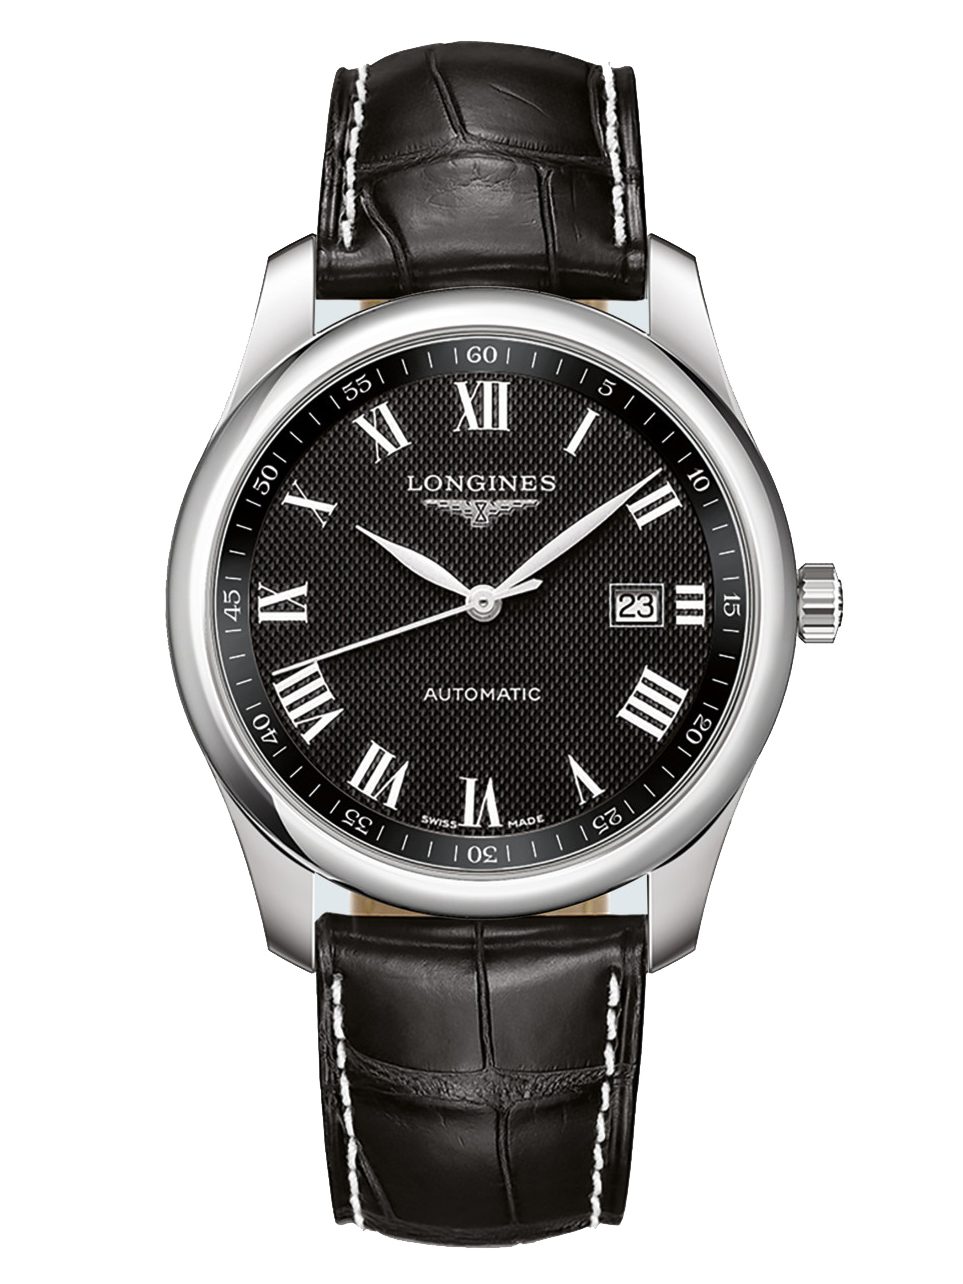 LONGINES - MASTER COLLECTION - L2.793.4.51.7